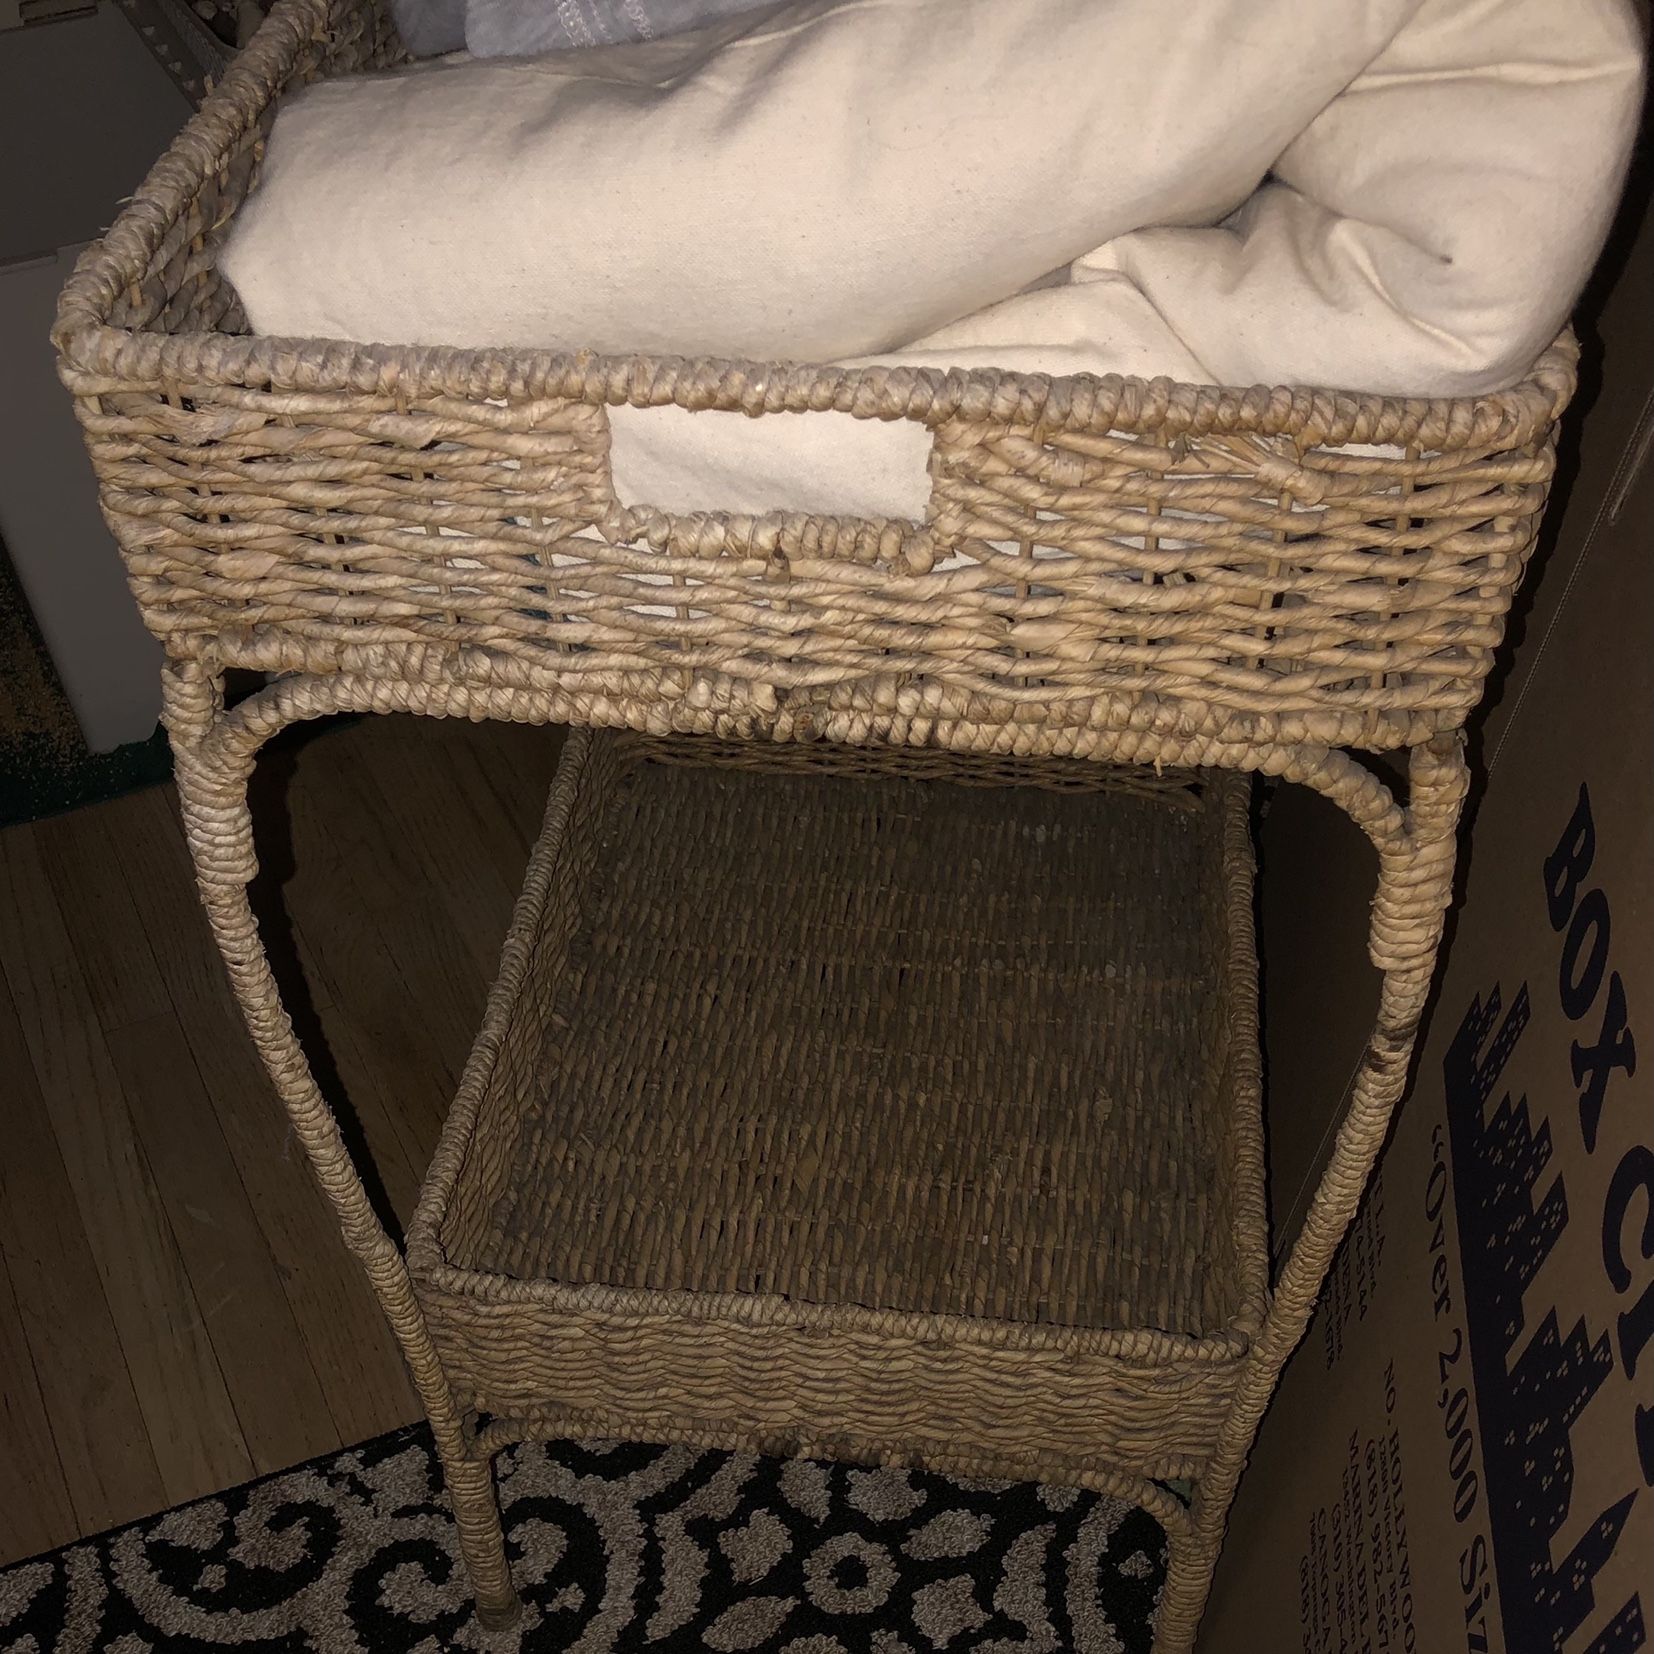 SOLD TWO/ONLY ONE LEFT/World Market Wicker Beverage/Bar/Plant Stand/Kitchen/Utility Cart. The Price For ONE Is $35 - Firm!